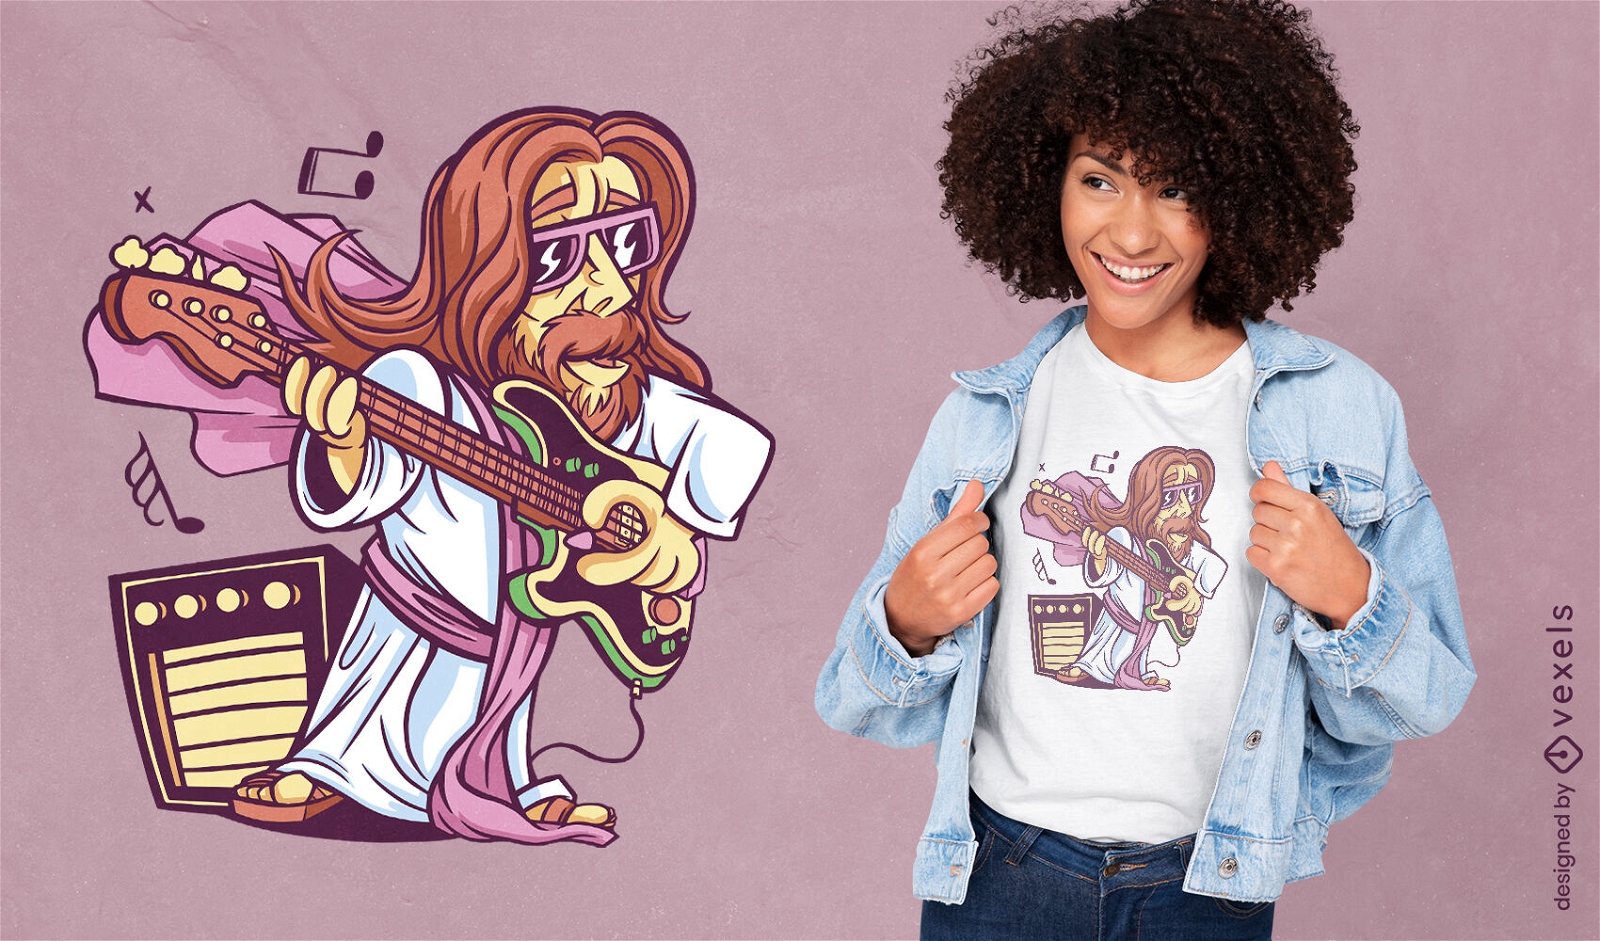 Jesus with electric guitar t-shirt design